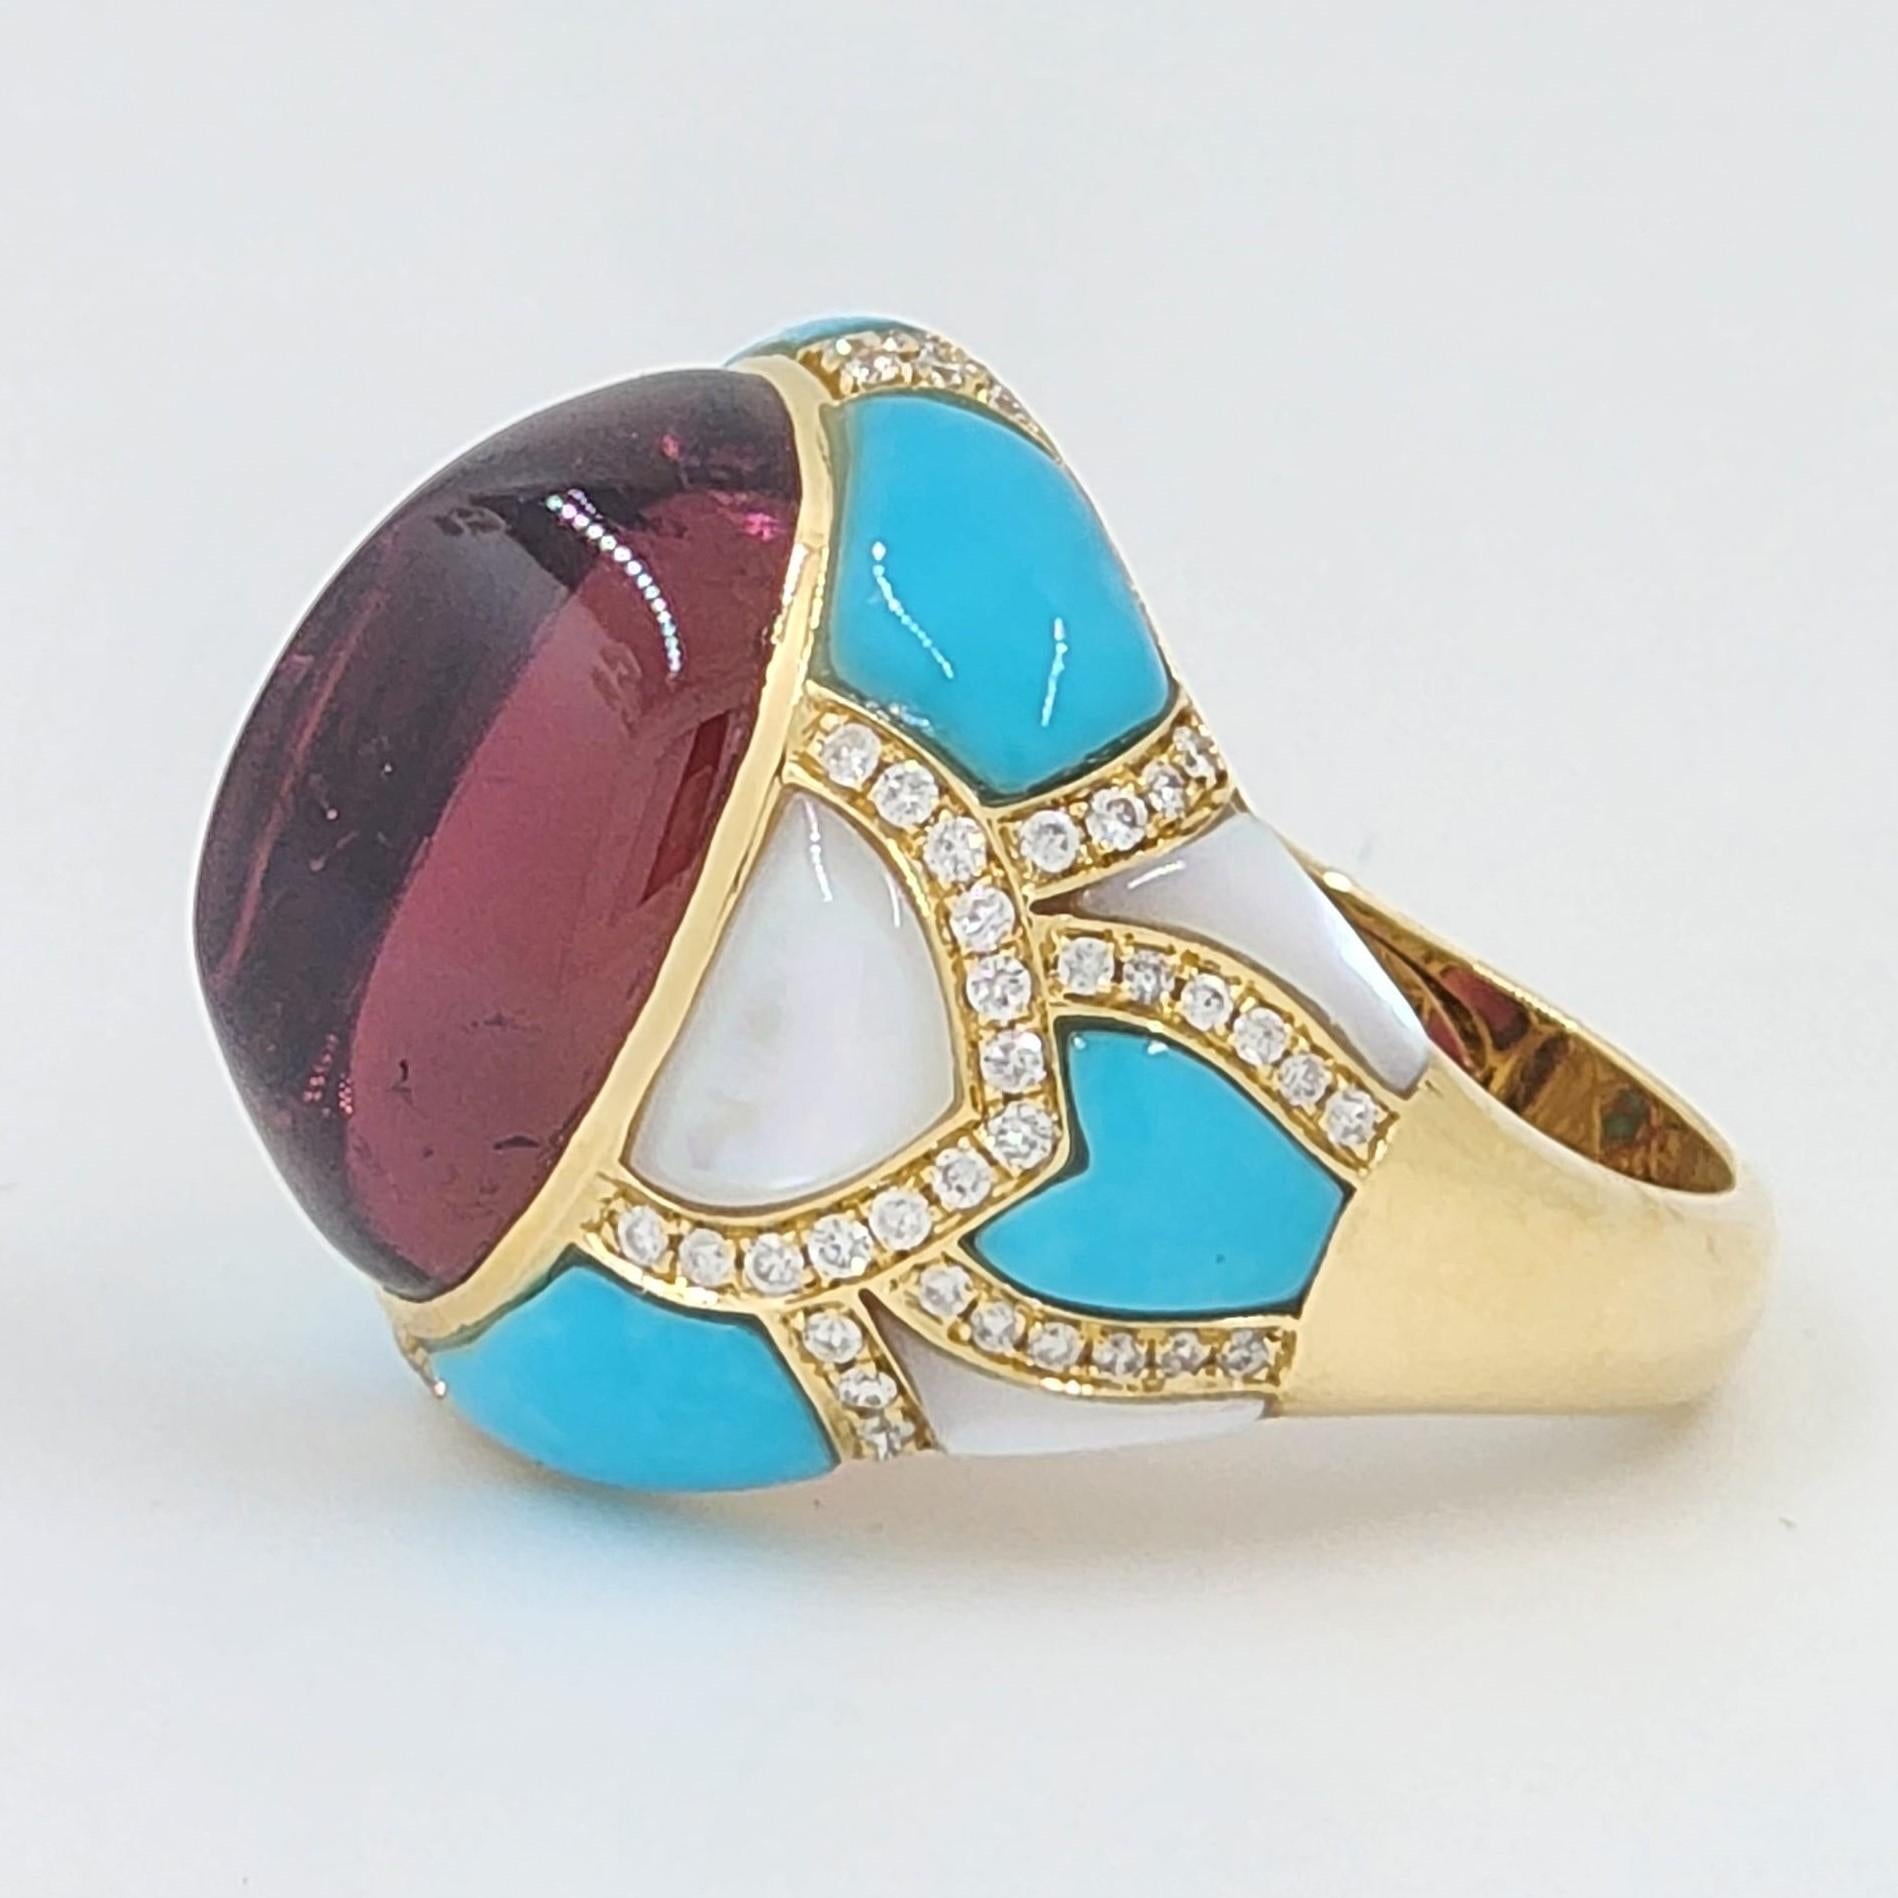 Cabochon Tourmaline Turquoise Mother-of-Pearl Diamond Cocktail Ring in 18k Yellow Gold